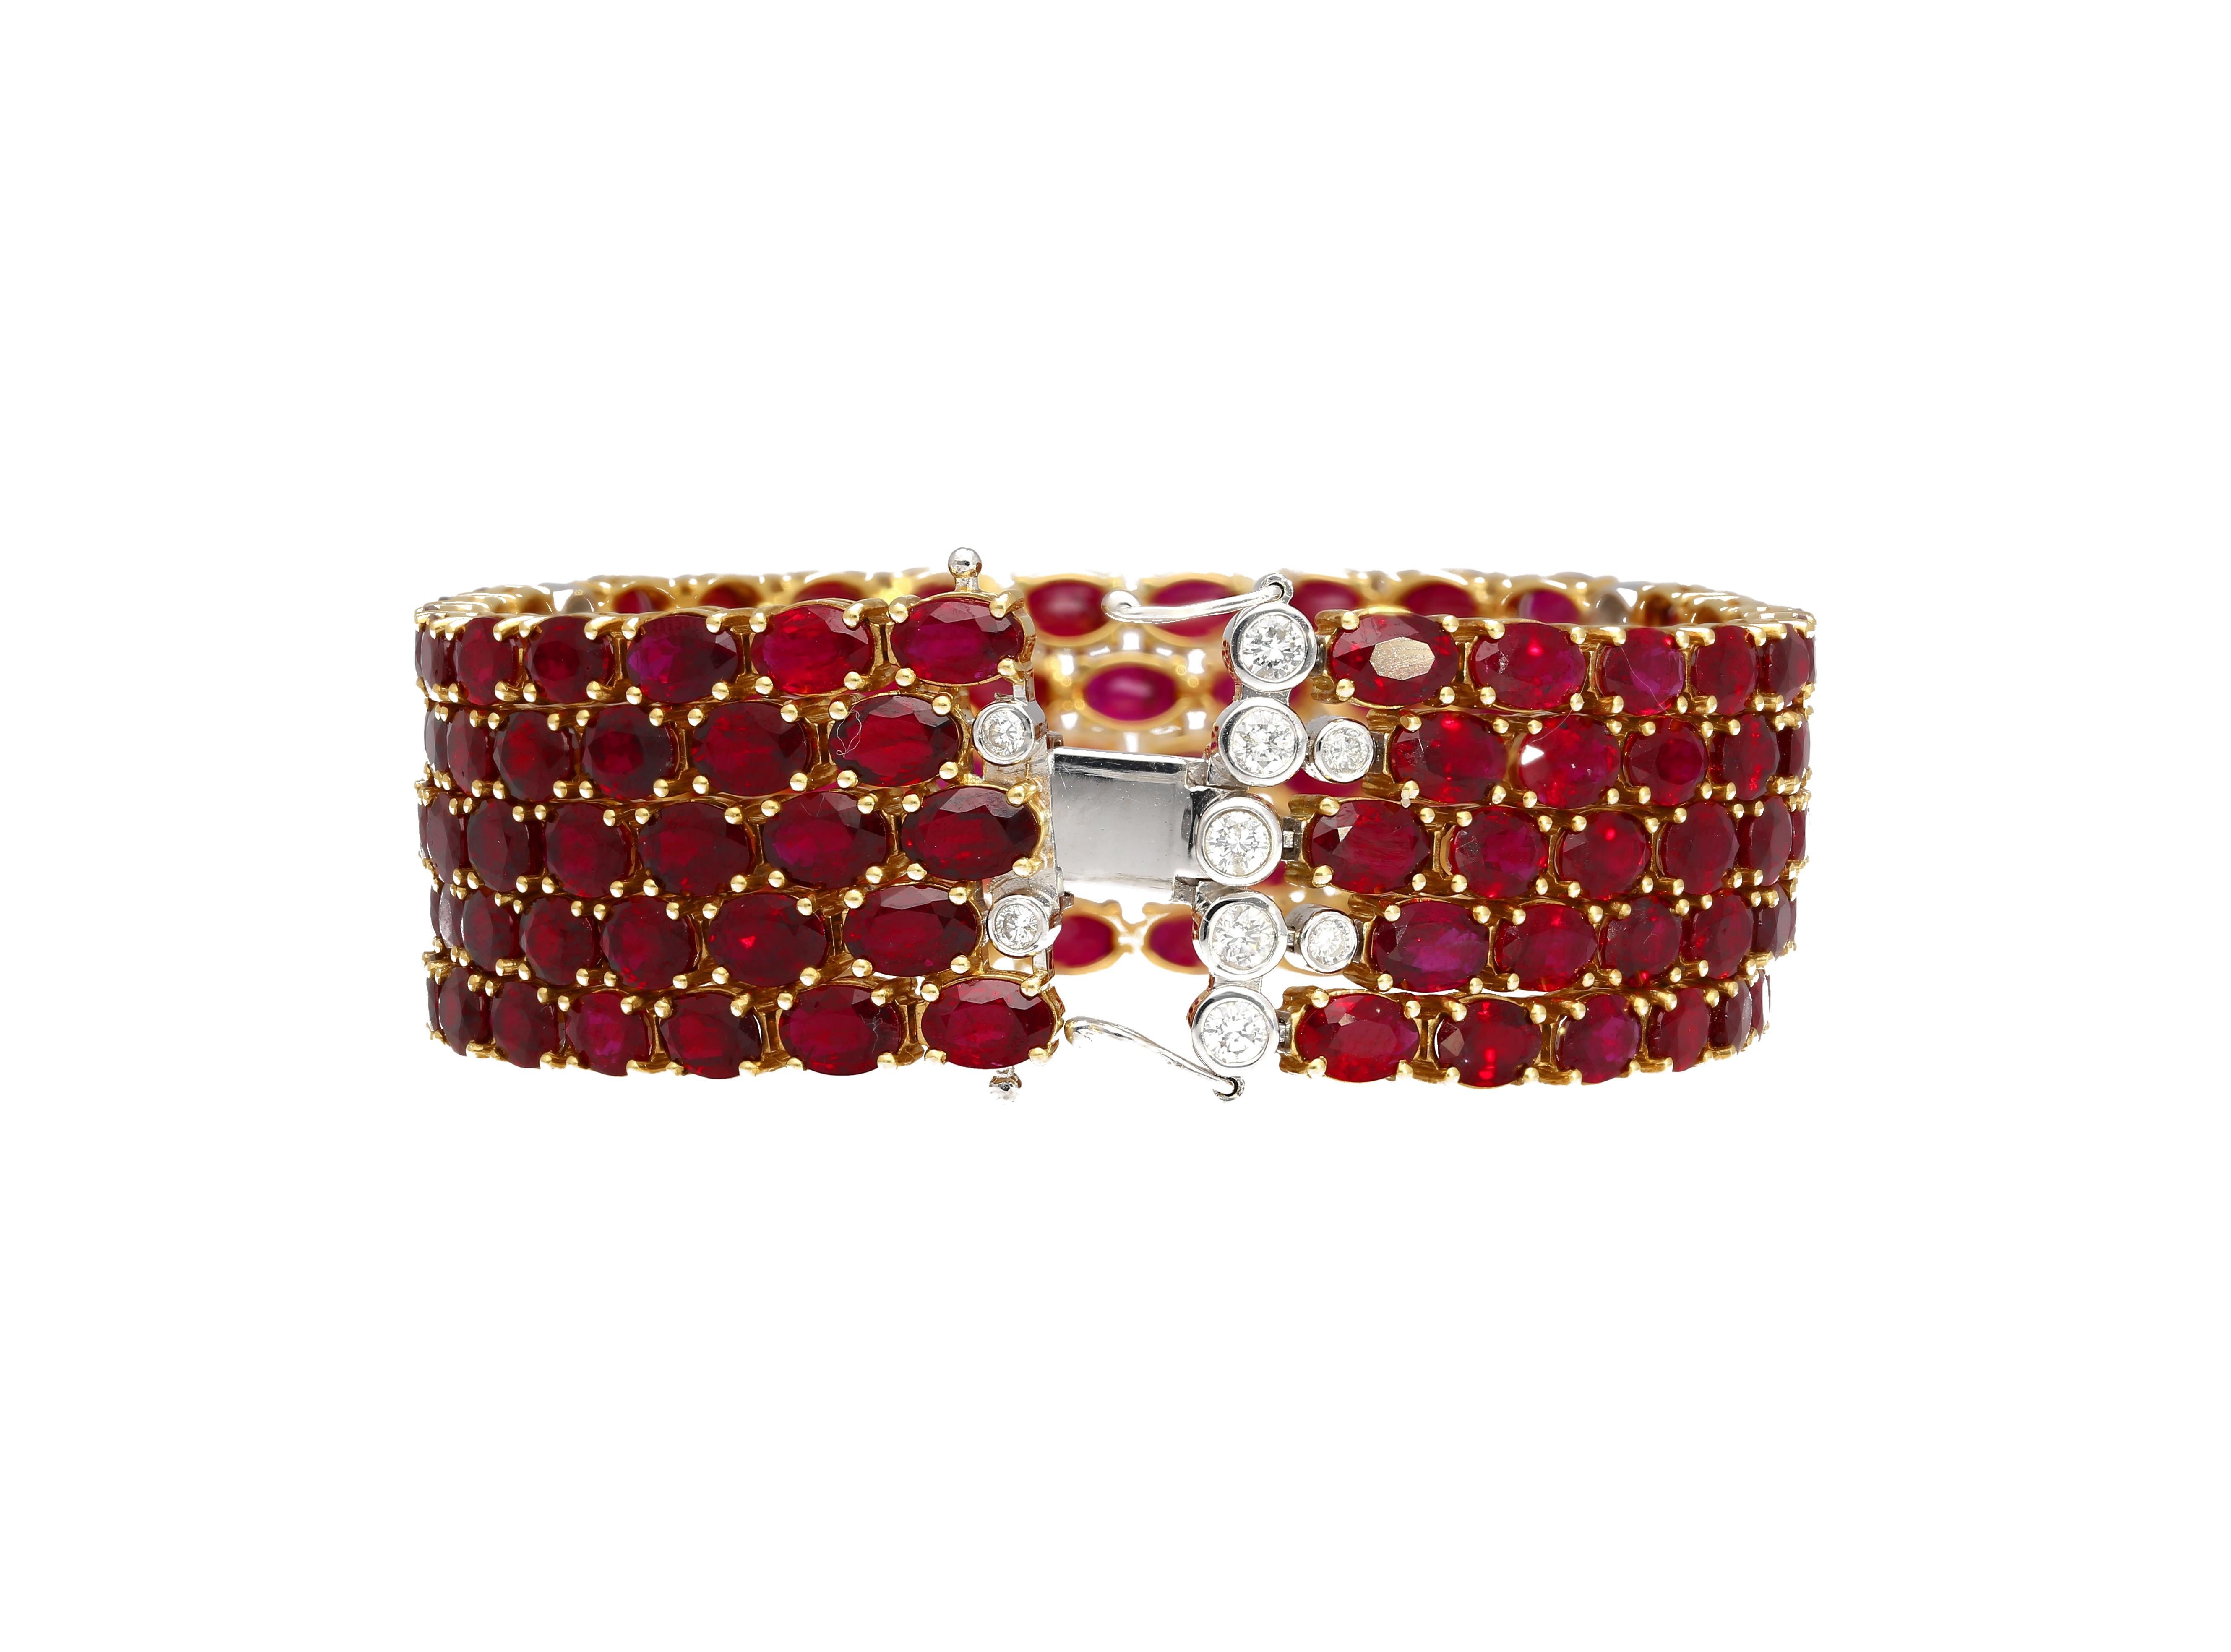 72.51 Carat Natural Oval Cut Ruby and Diamond 5-Row Multi Link 18K Gold Bracelet For Sale 1